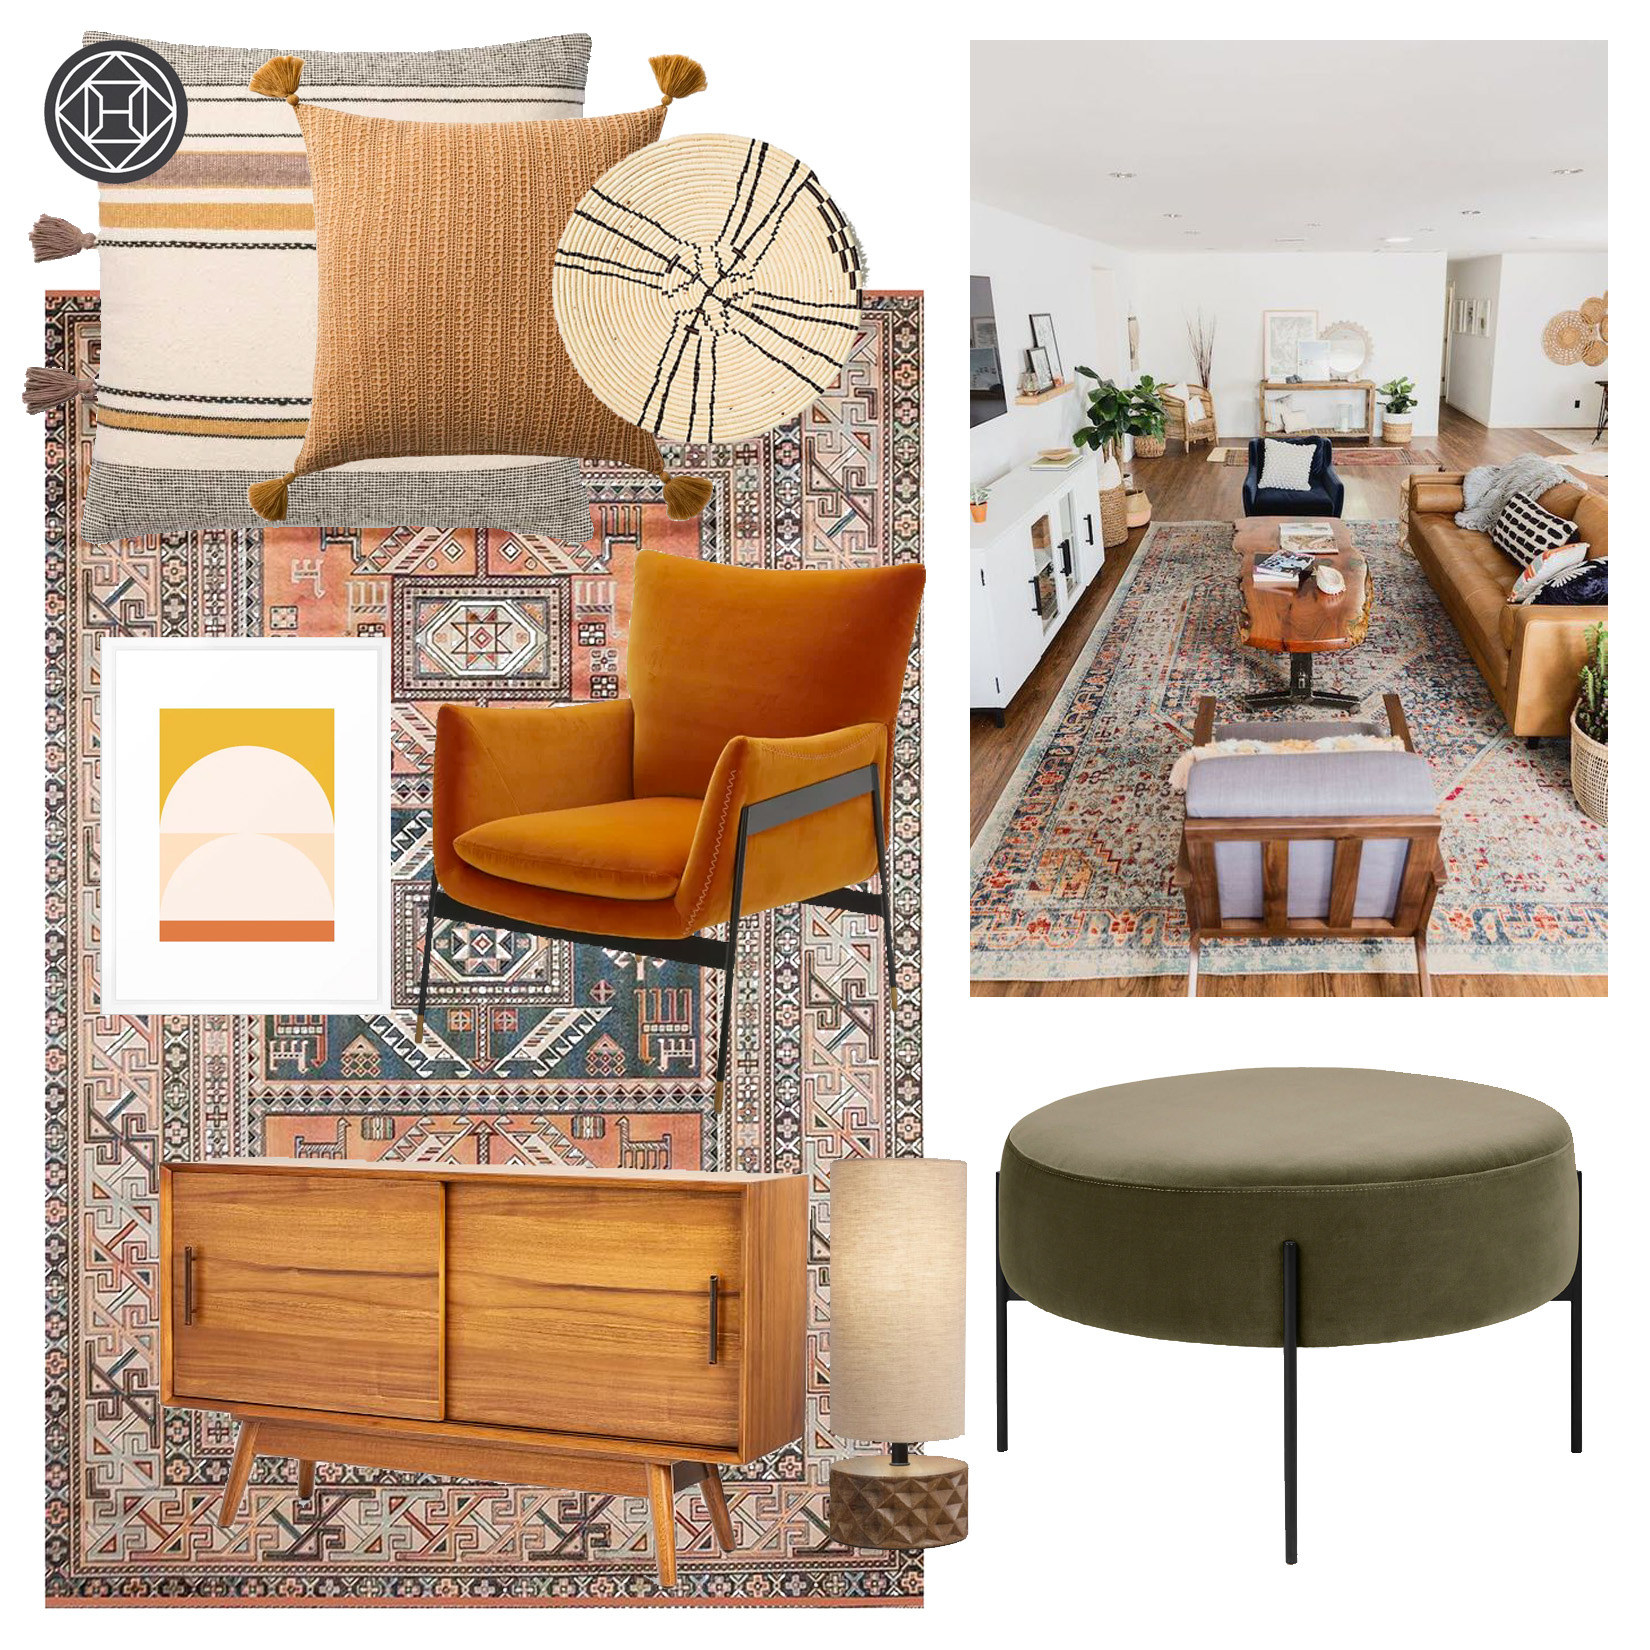 A design idea featuring a compilation of richly textured rugs and furniture with lots of warm tones like orange, yellow, and tan.